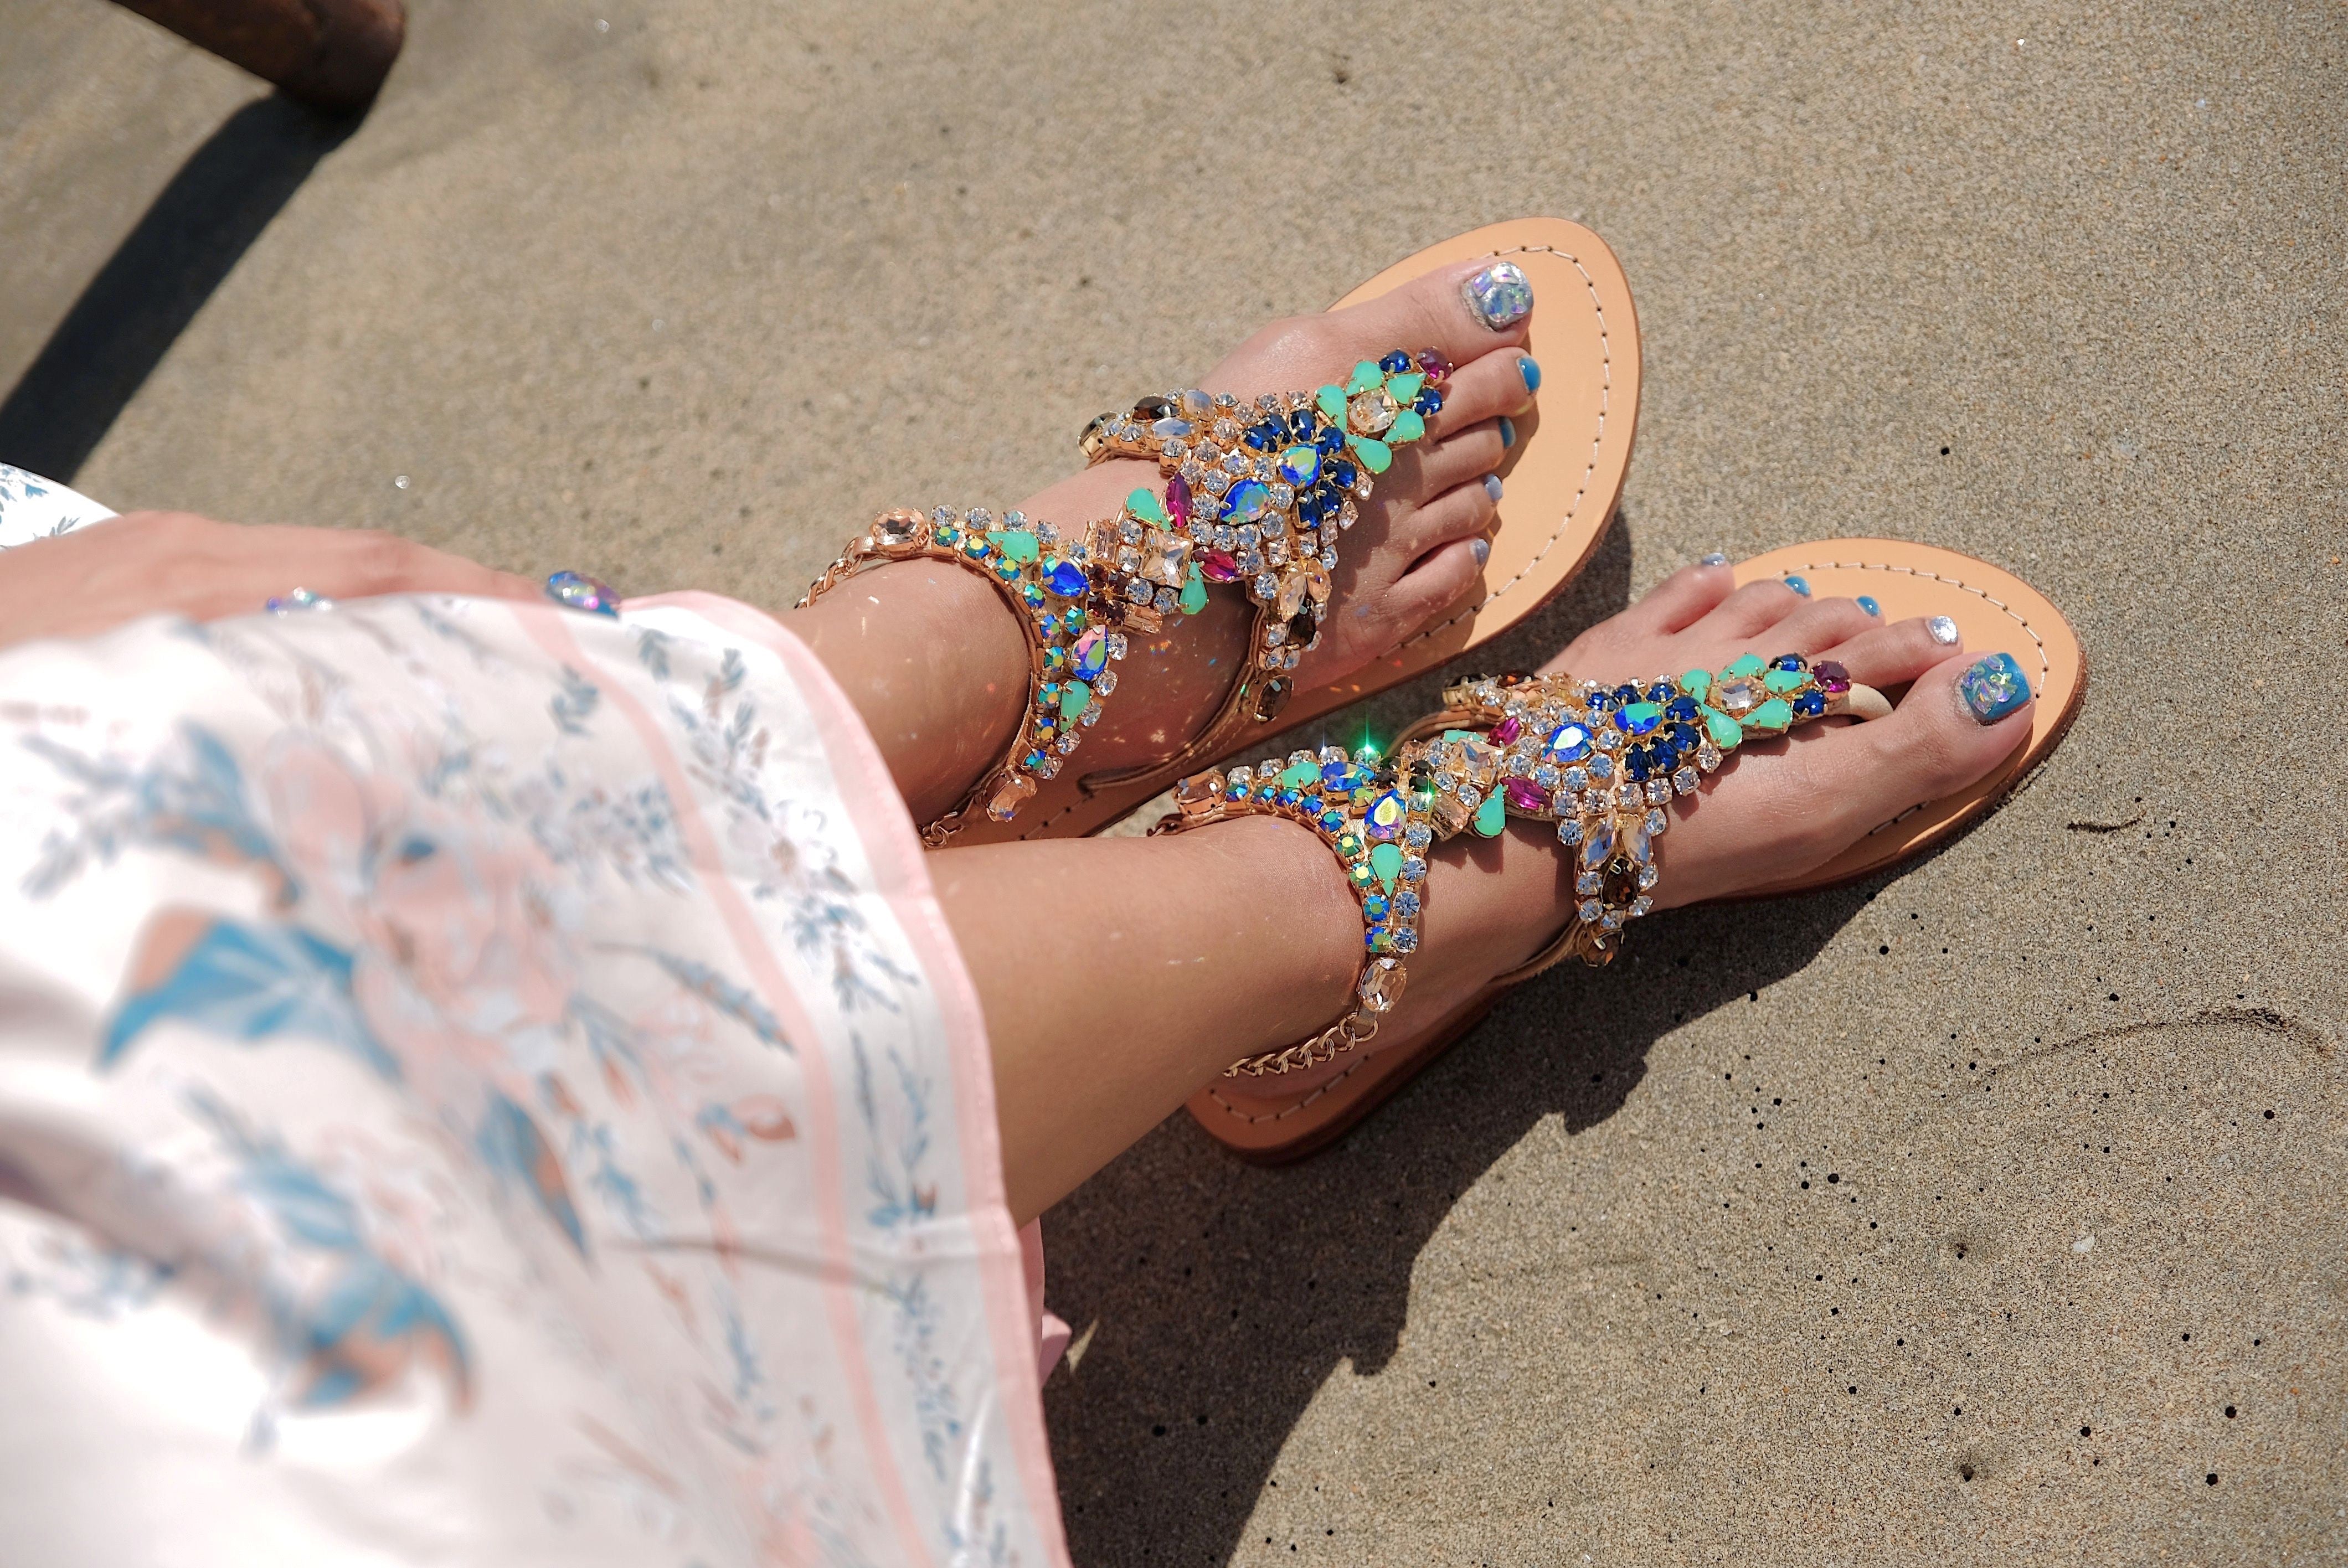 Bejeweled Bliss: Stride into the Summer Sparkle with PASHA Dazzling Jewelry Sandals